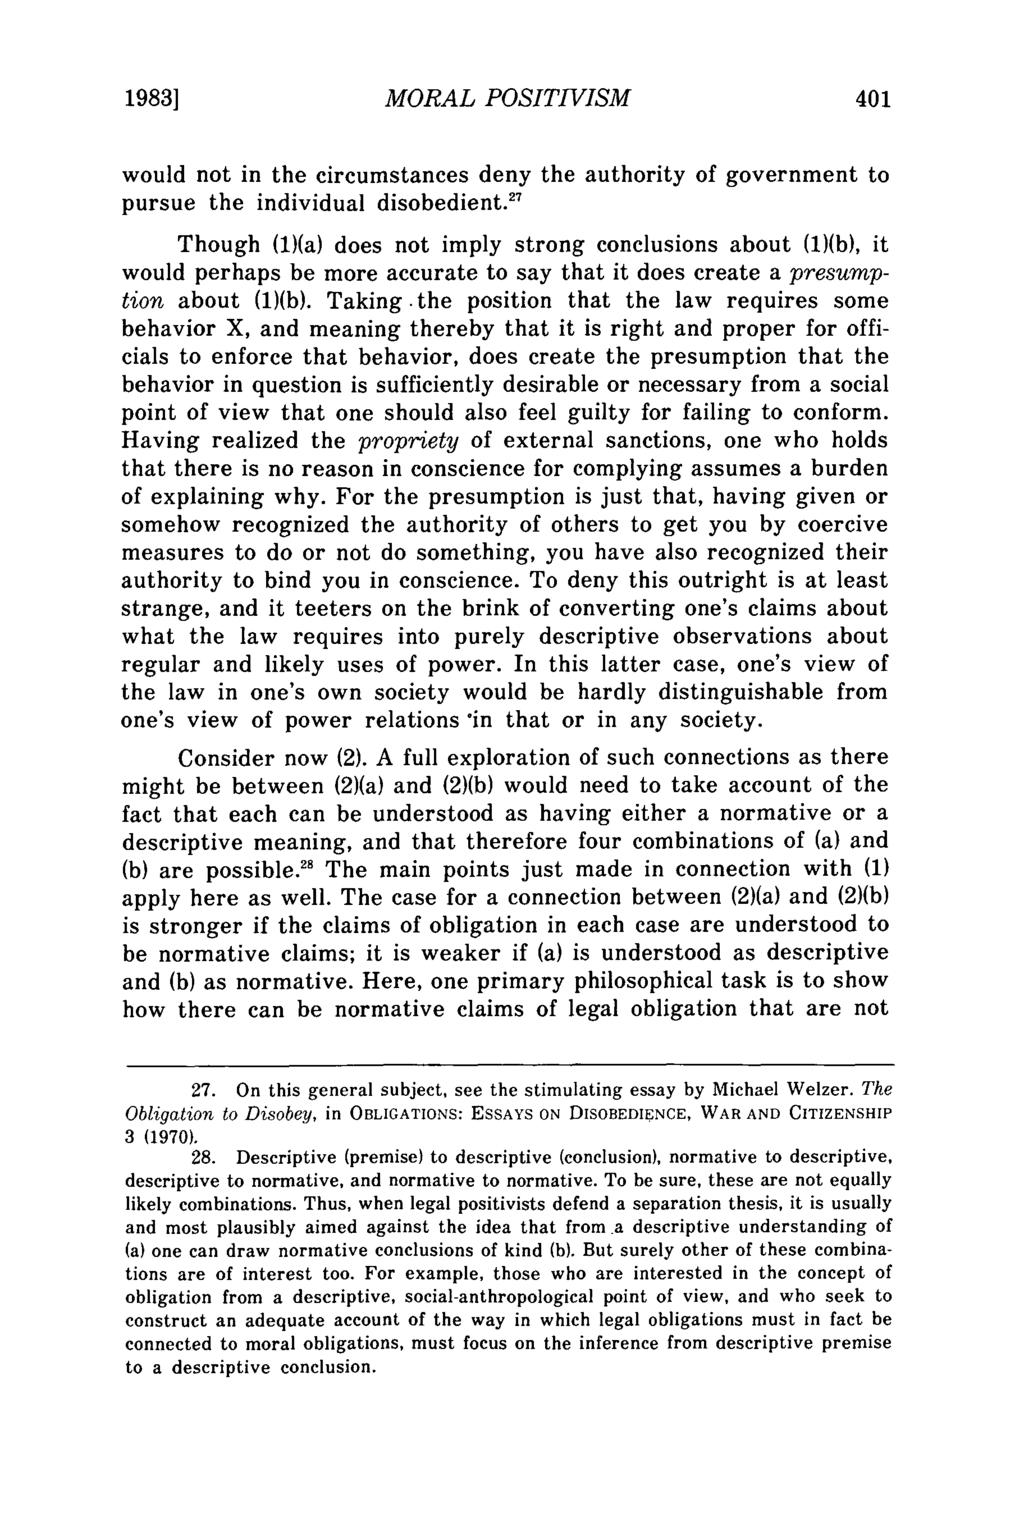 1983] Johnson: Moral Positivism and the Internal Legality of Morals MORAL POSITIVISM would not in the circumstances deny the authority of government to pursue the individual disobedient.